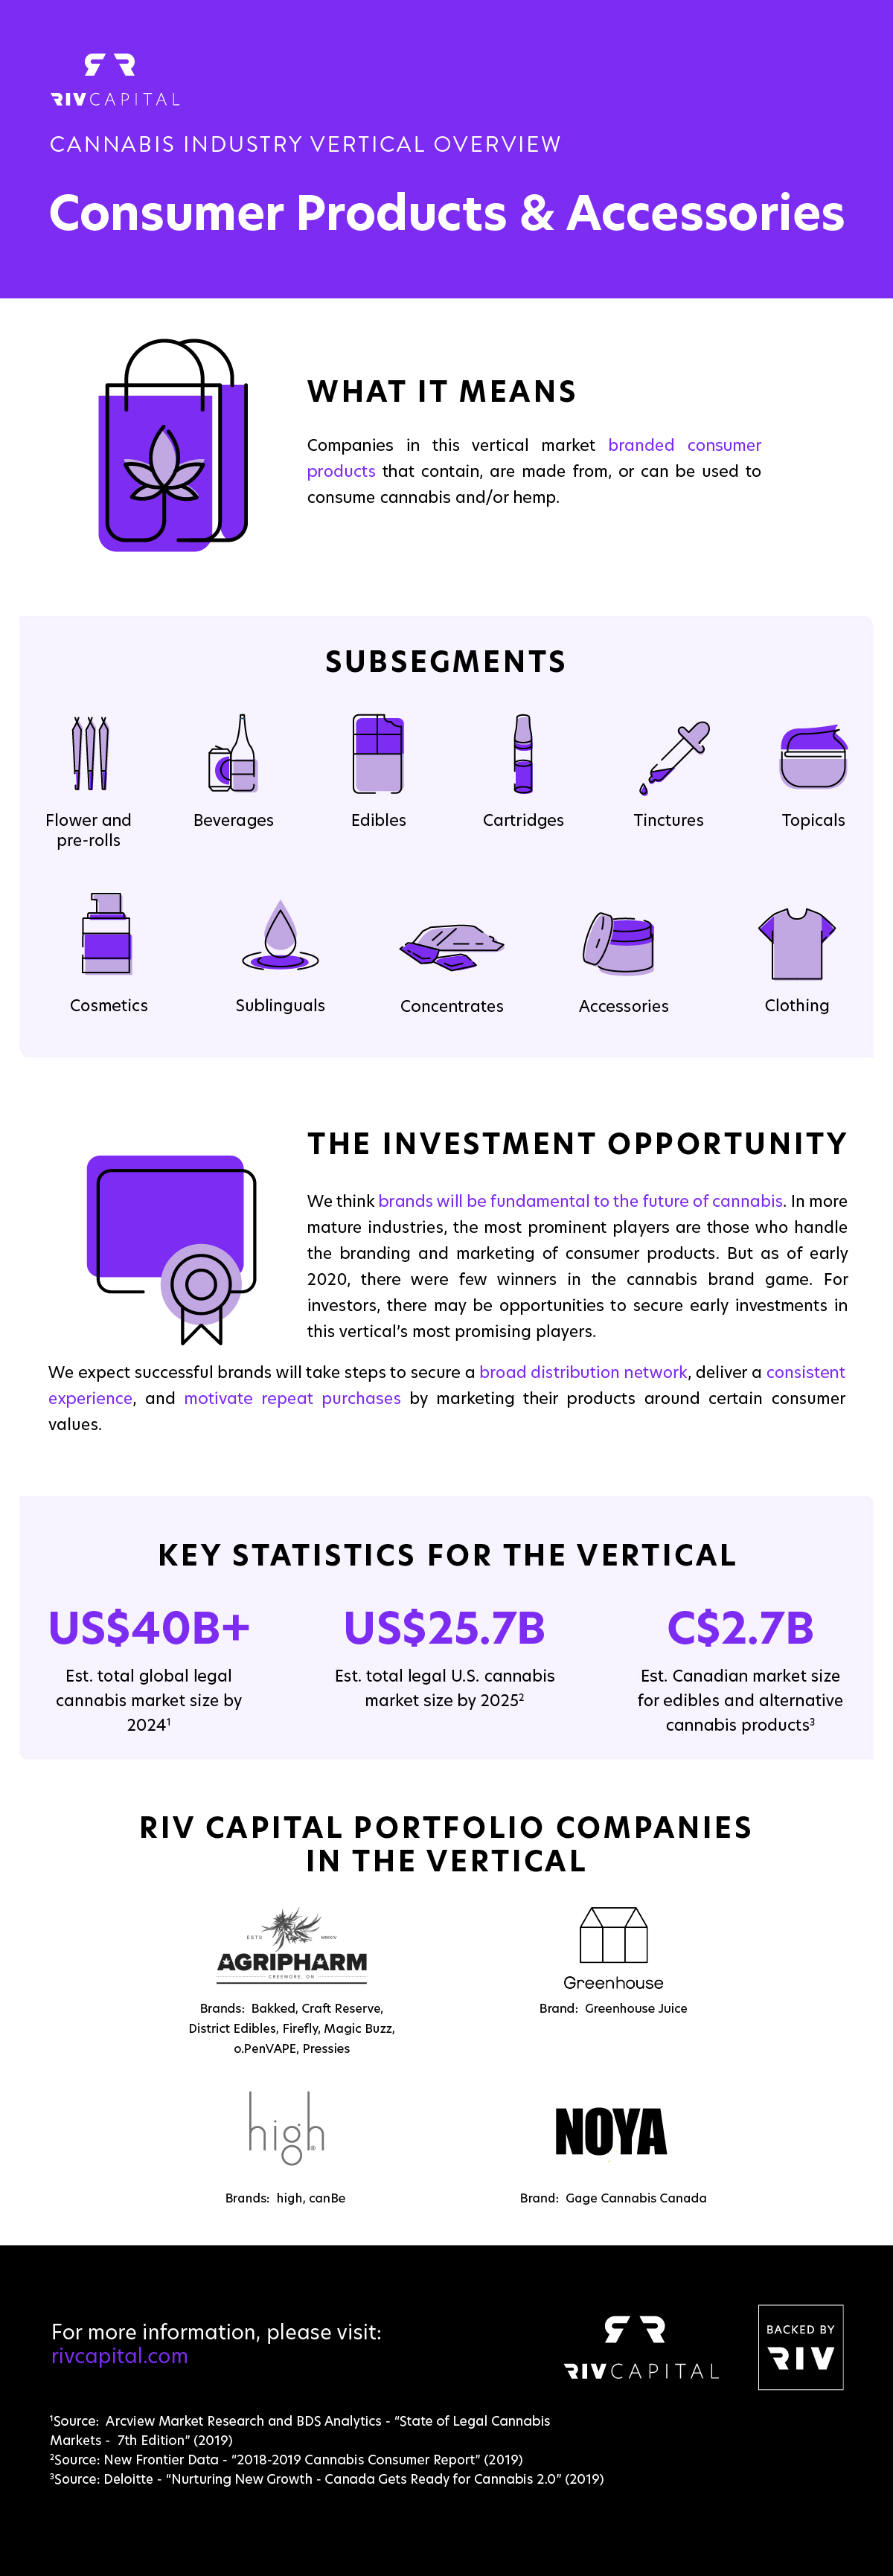 Consumer Products and Accessories: an infographic on the cannabis CPG vertical, with information on the investment opportunity, subsegments, and more.